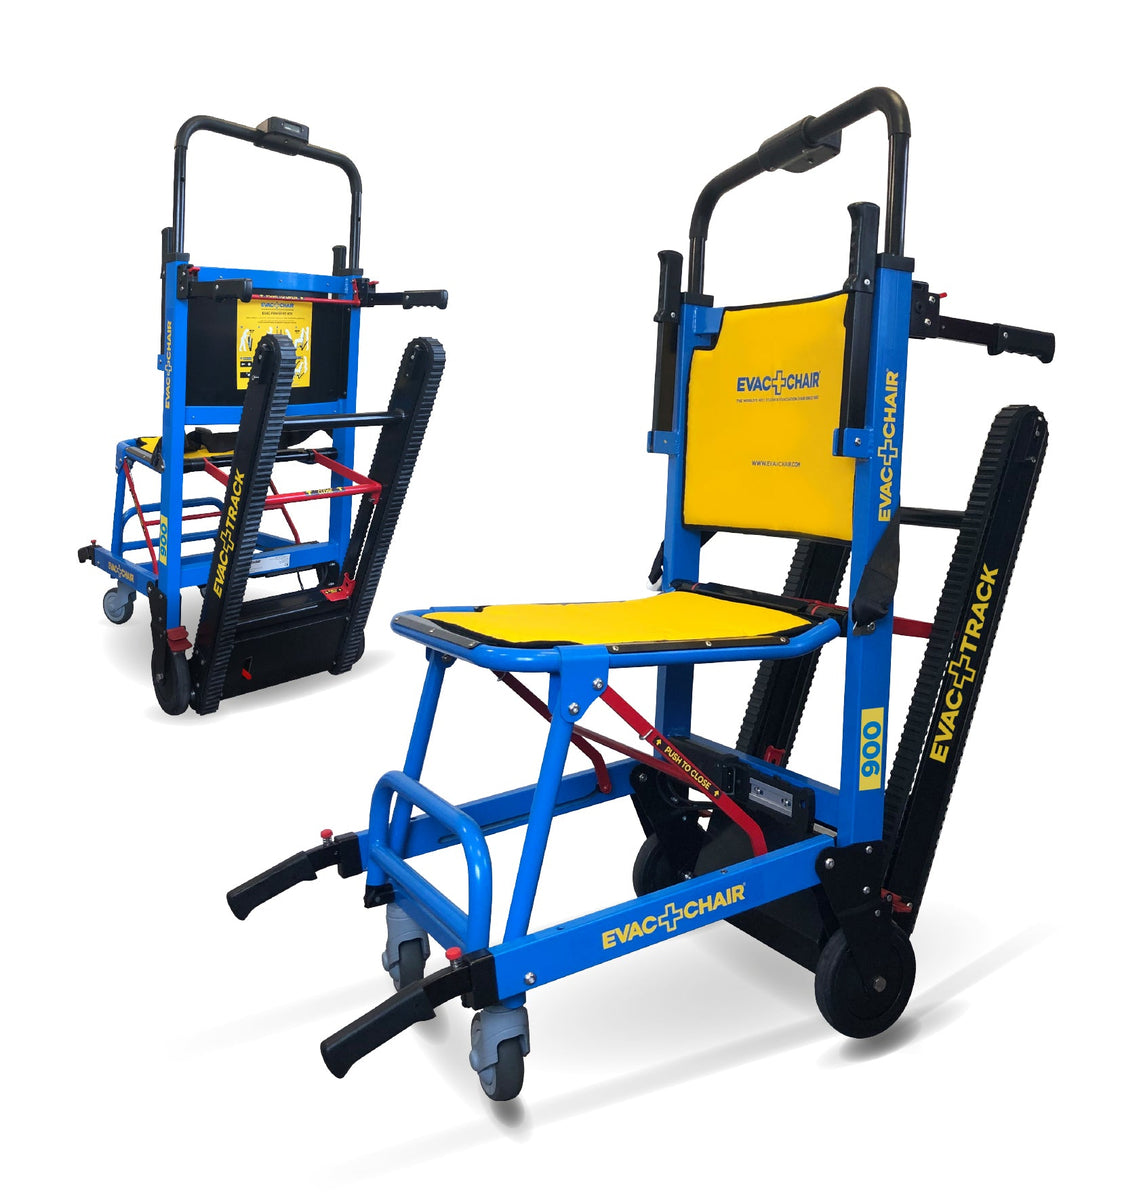 Evac+Chair 900 Power Chair | AED Professionals